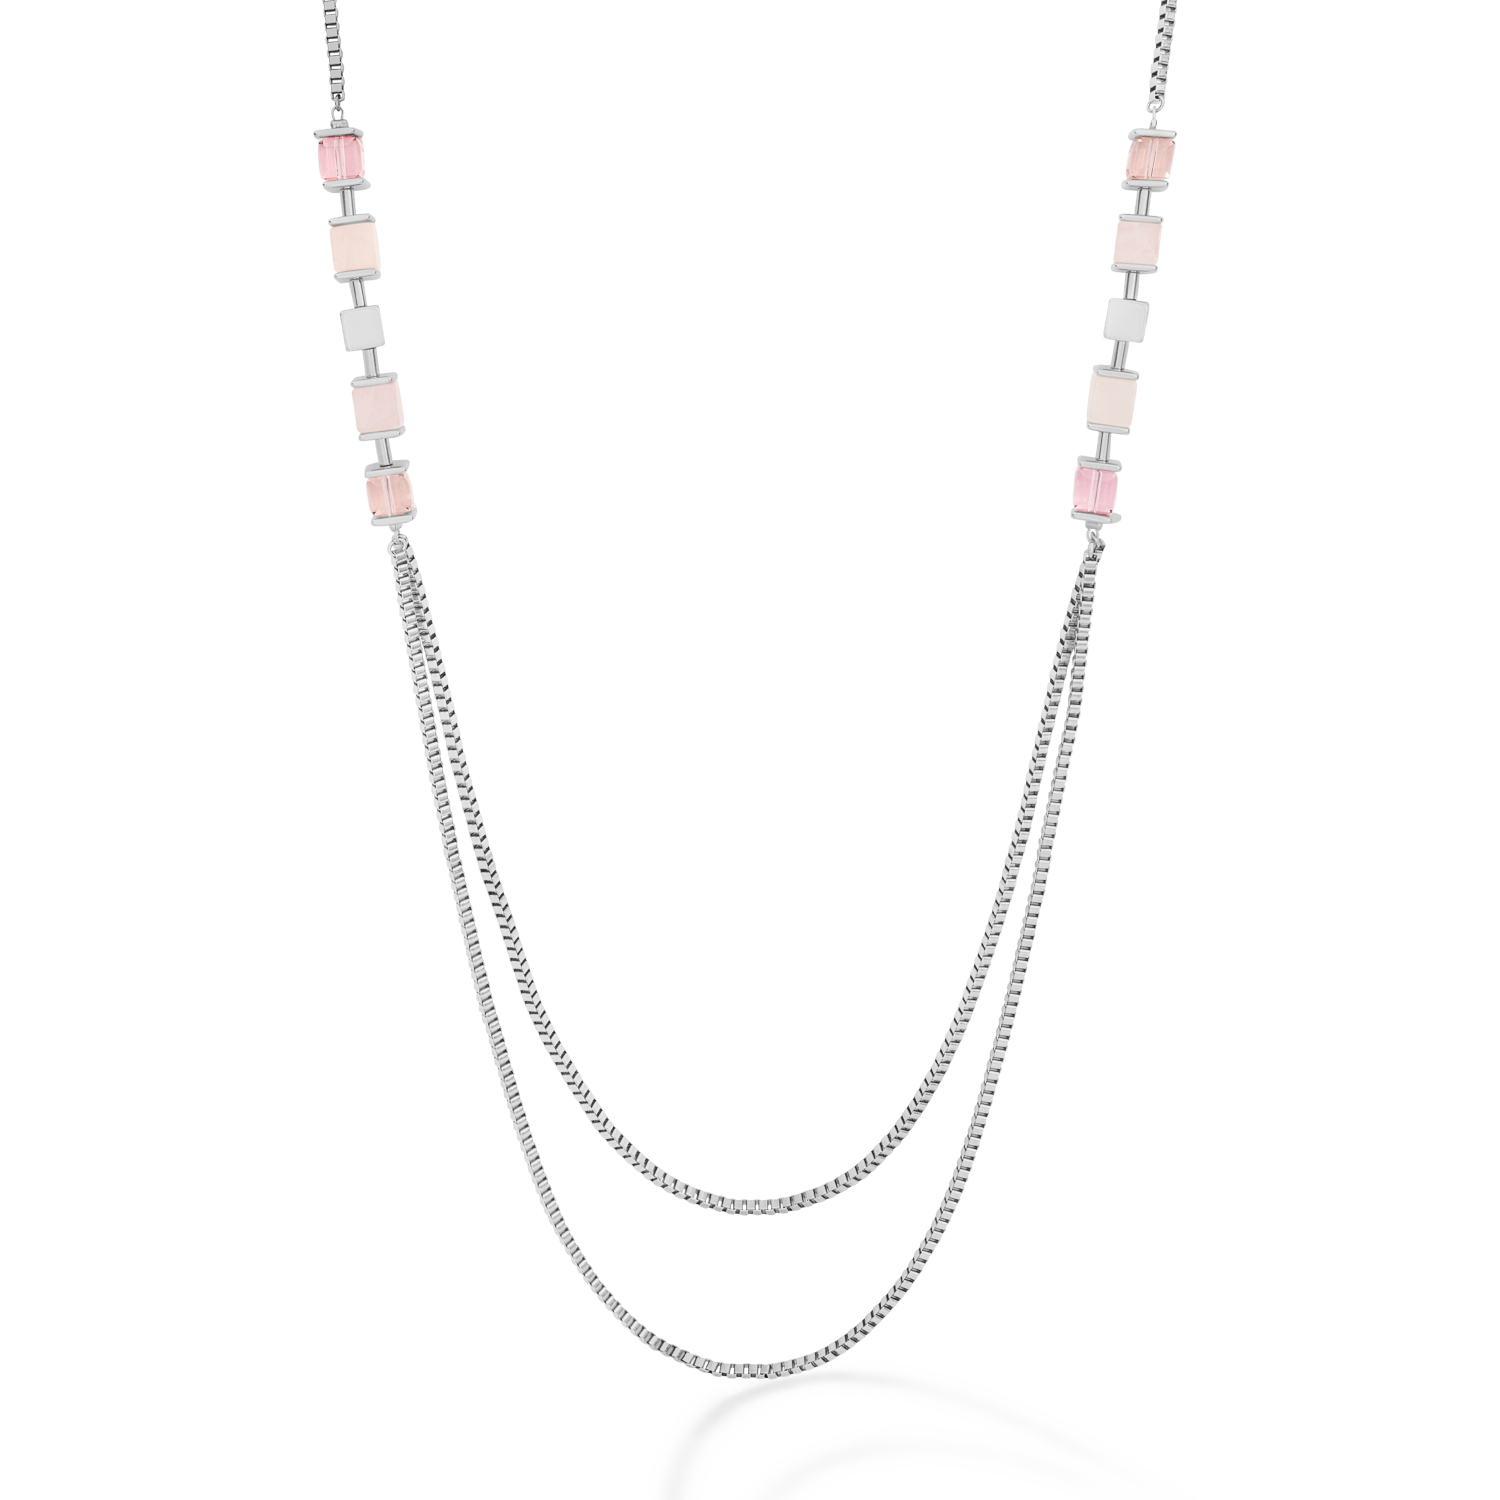 Necklace GeoCUBE® & chain large silver light rose